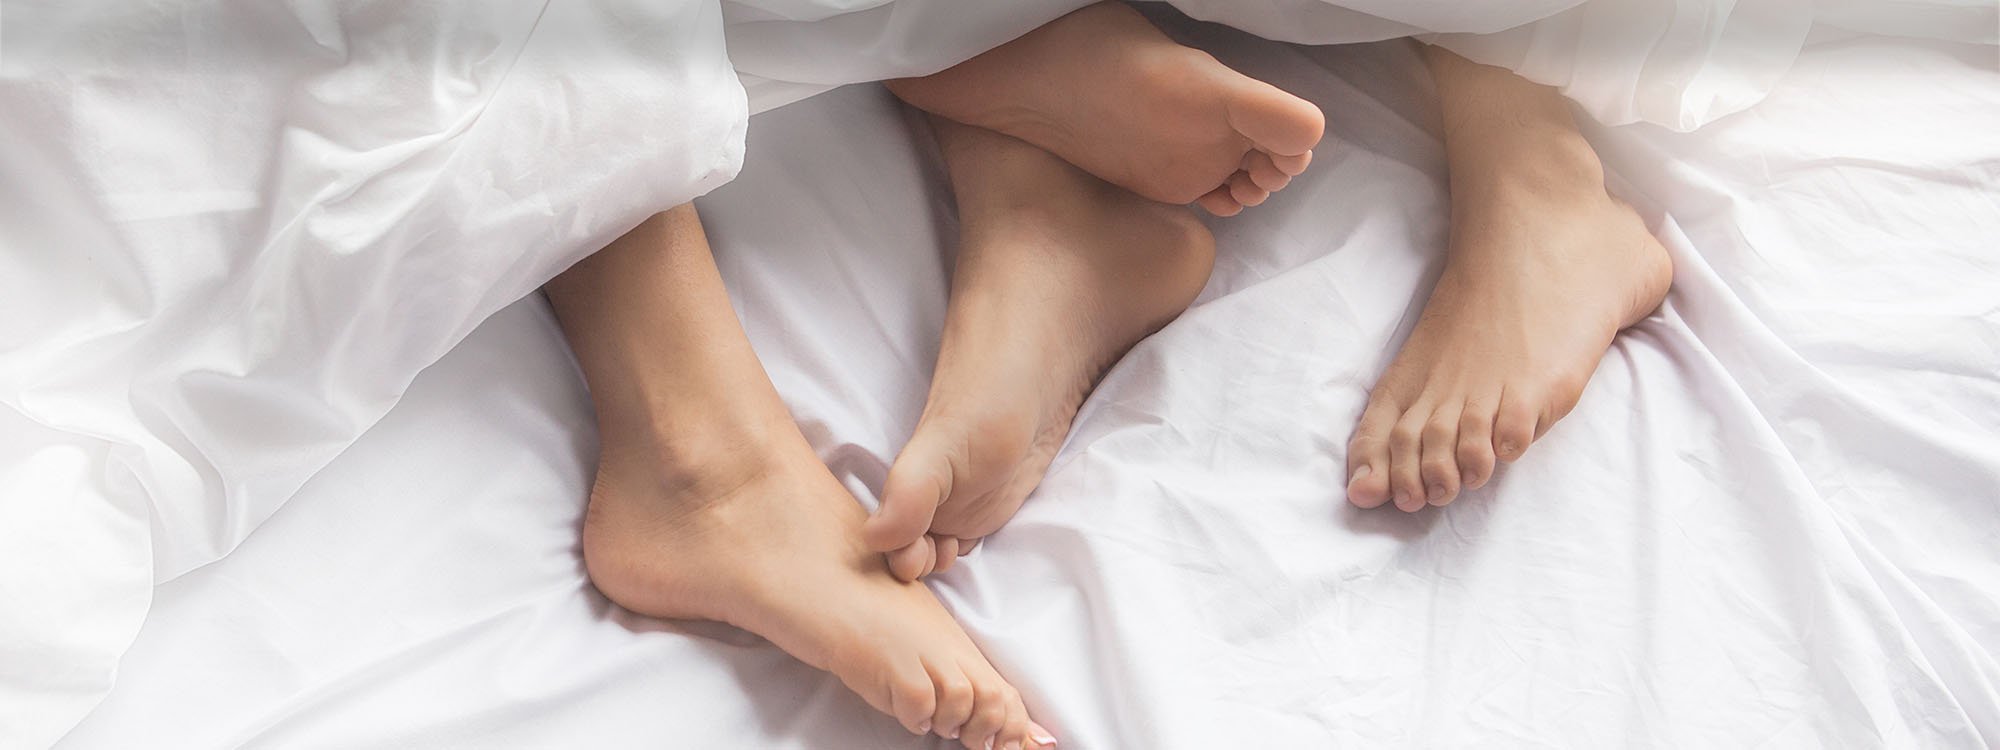 Couples legs displaying in Bed.